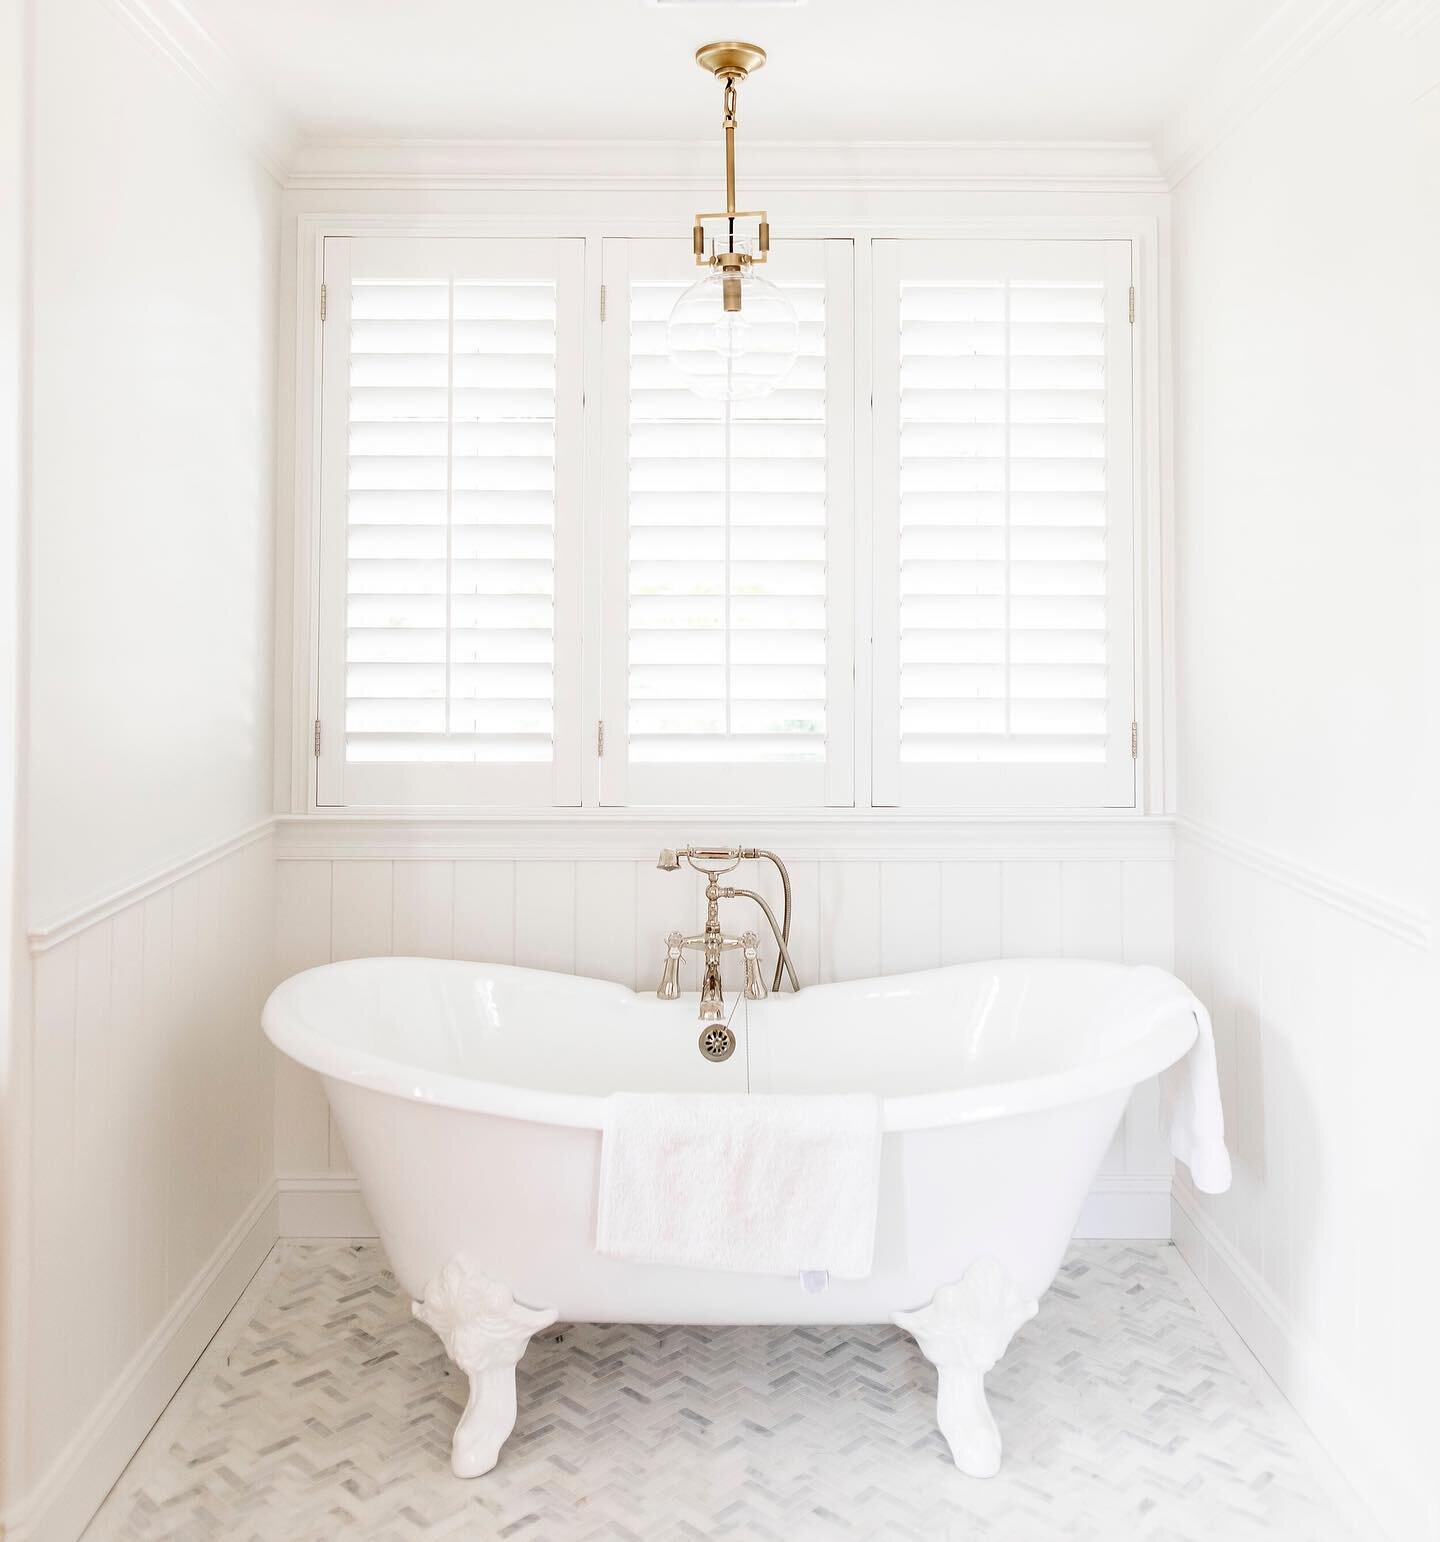 Throwing it back to #TheAcetoHome + this beautiful clawfoot tub in their master bathroom. Taking baths to the NEXT LEVEL. 😍